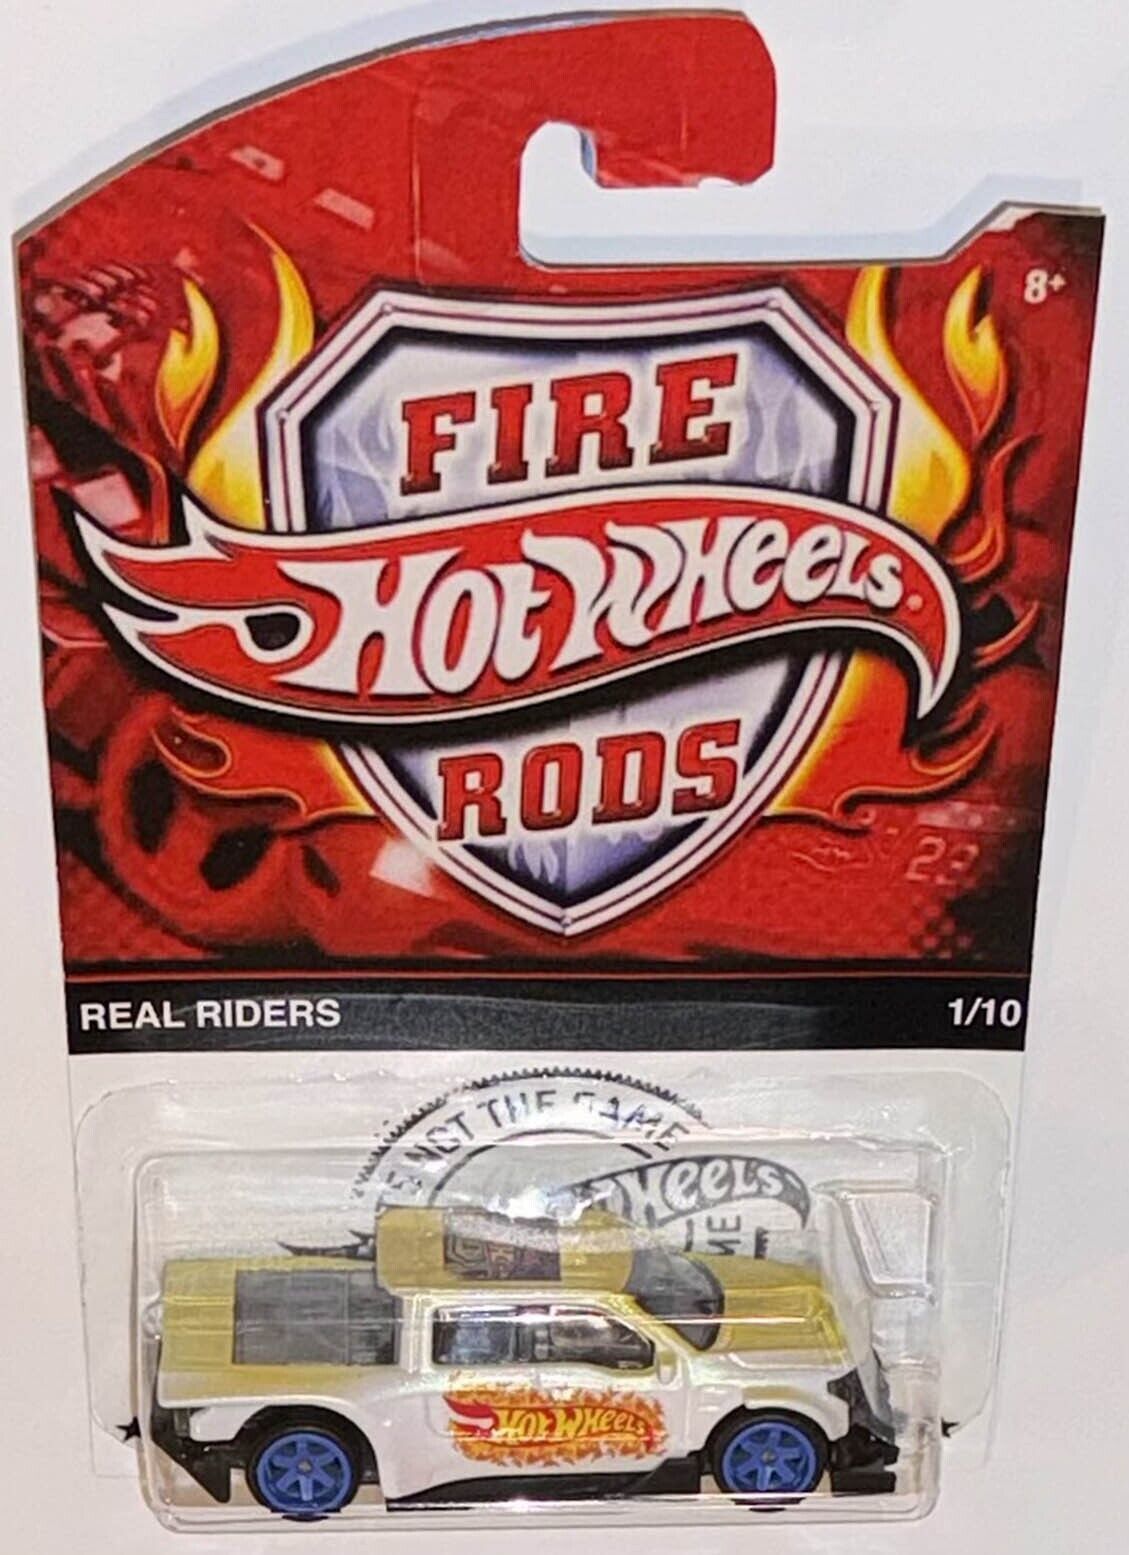 Primary image for Ford F150 Lightning Custom Hot Wheels Fire Rods Series w/Real Riders f-150 Truck